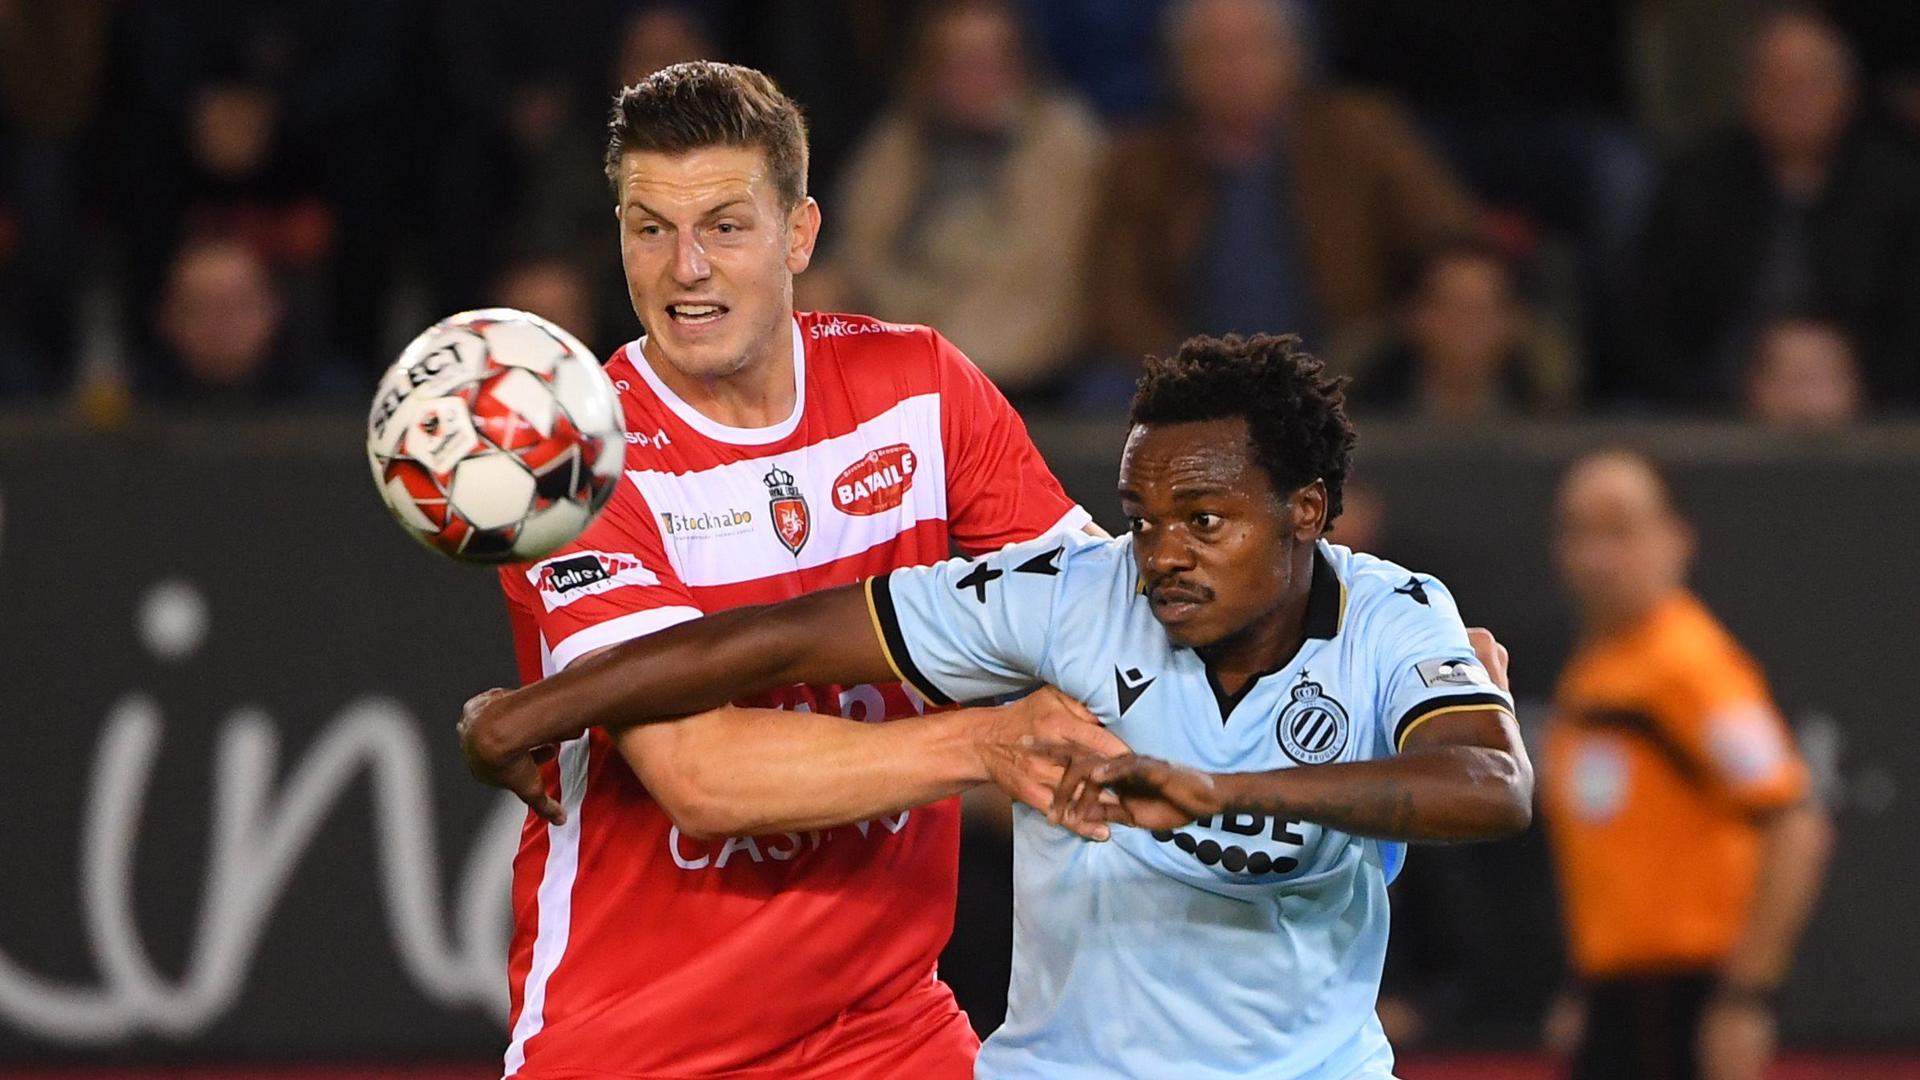 Kevin Wimmer forward of Mouscron, Percy Tau forward of Club Brugge during the Jupiler Pro League match between Royal Excel Mouscron Peruwelz and Club Brugge KV on October 18, 2019 in Mouscron, Belgium, 18/10/2019 FOOTBALL : Mouscron vs Club Bruges - Jupiler Pro League - 18/10/2019 PhotoNews/Panoramic PUBLICATIONxINxGERxSUIxAUTxHUNxONLY 775375123